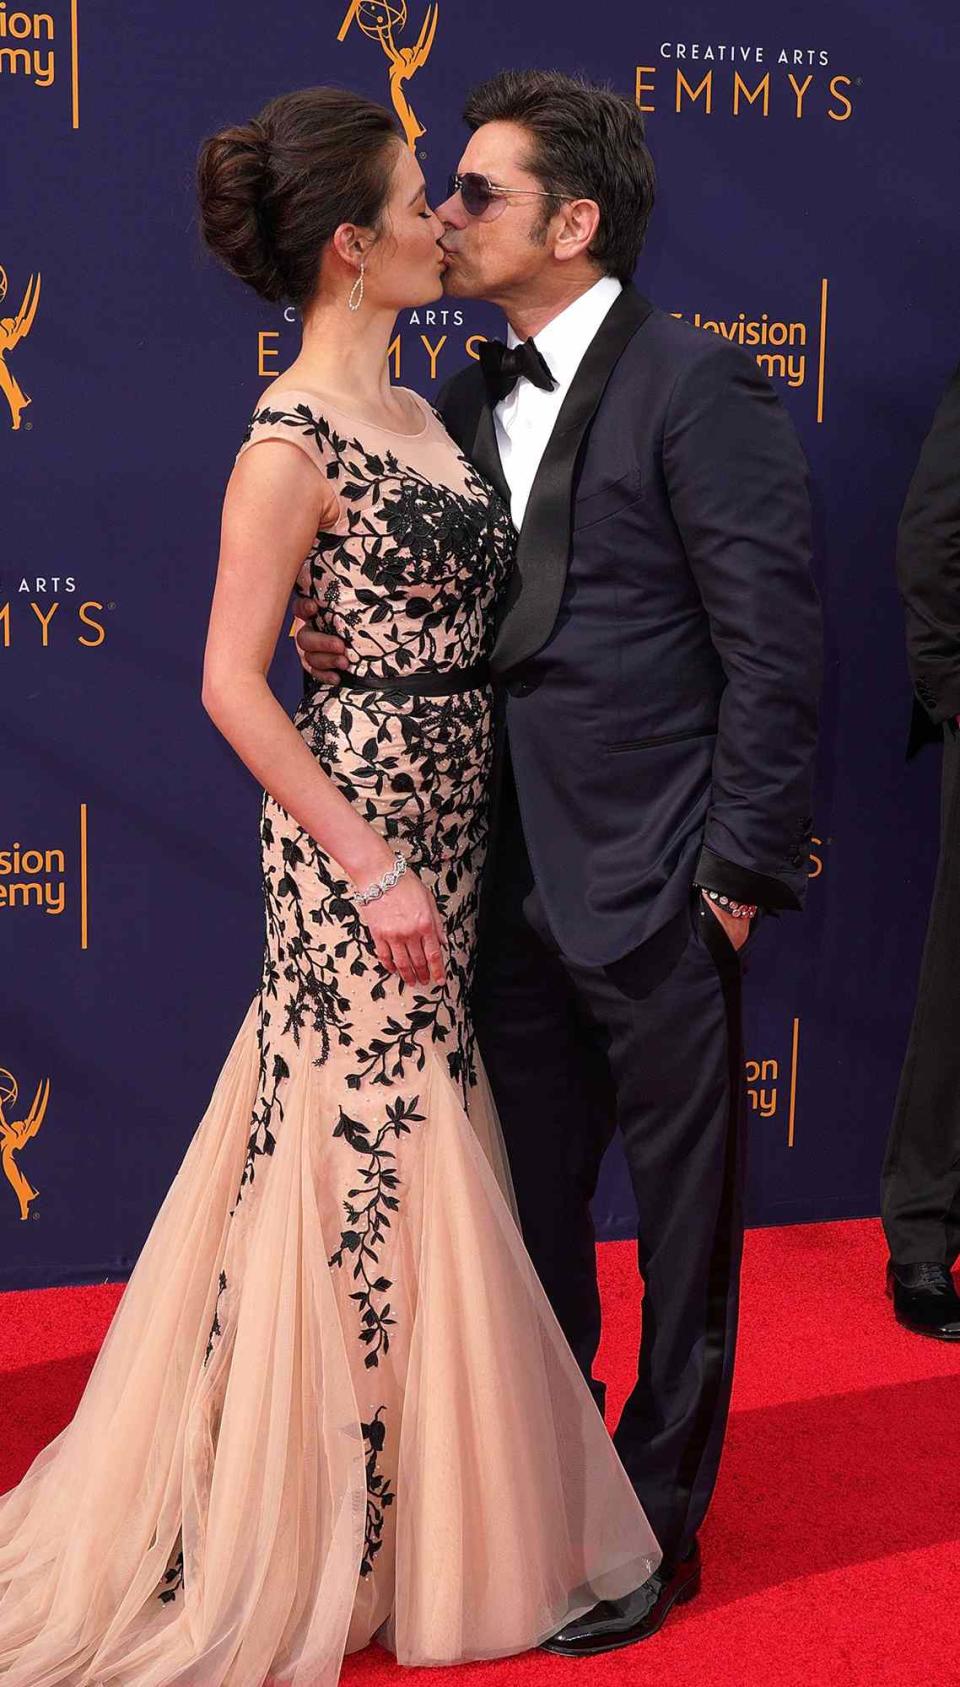 Caitlin McHugh and John Stamos attend the 2018 Creative Arts Emmy Awards at Microsoft Theater on September 8, 2018 in Los Angeles, California